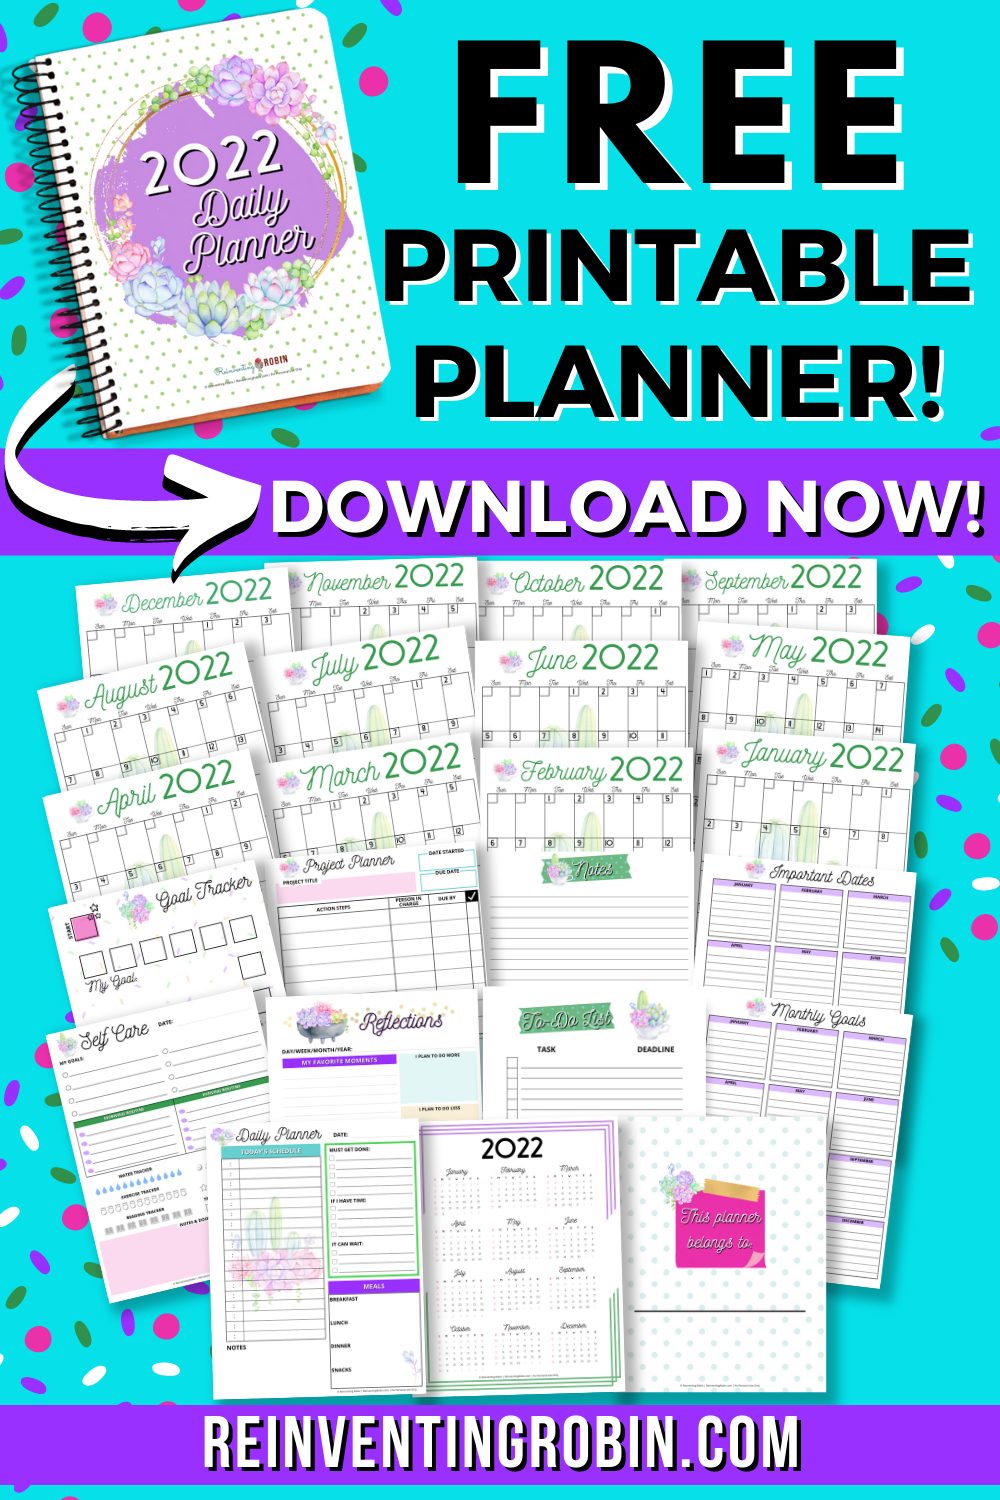 Text says Free Printable Planner Download Now! With pictures of planner pages & www.reinventingrobin.com at the bottom.